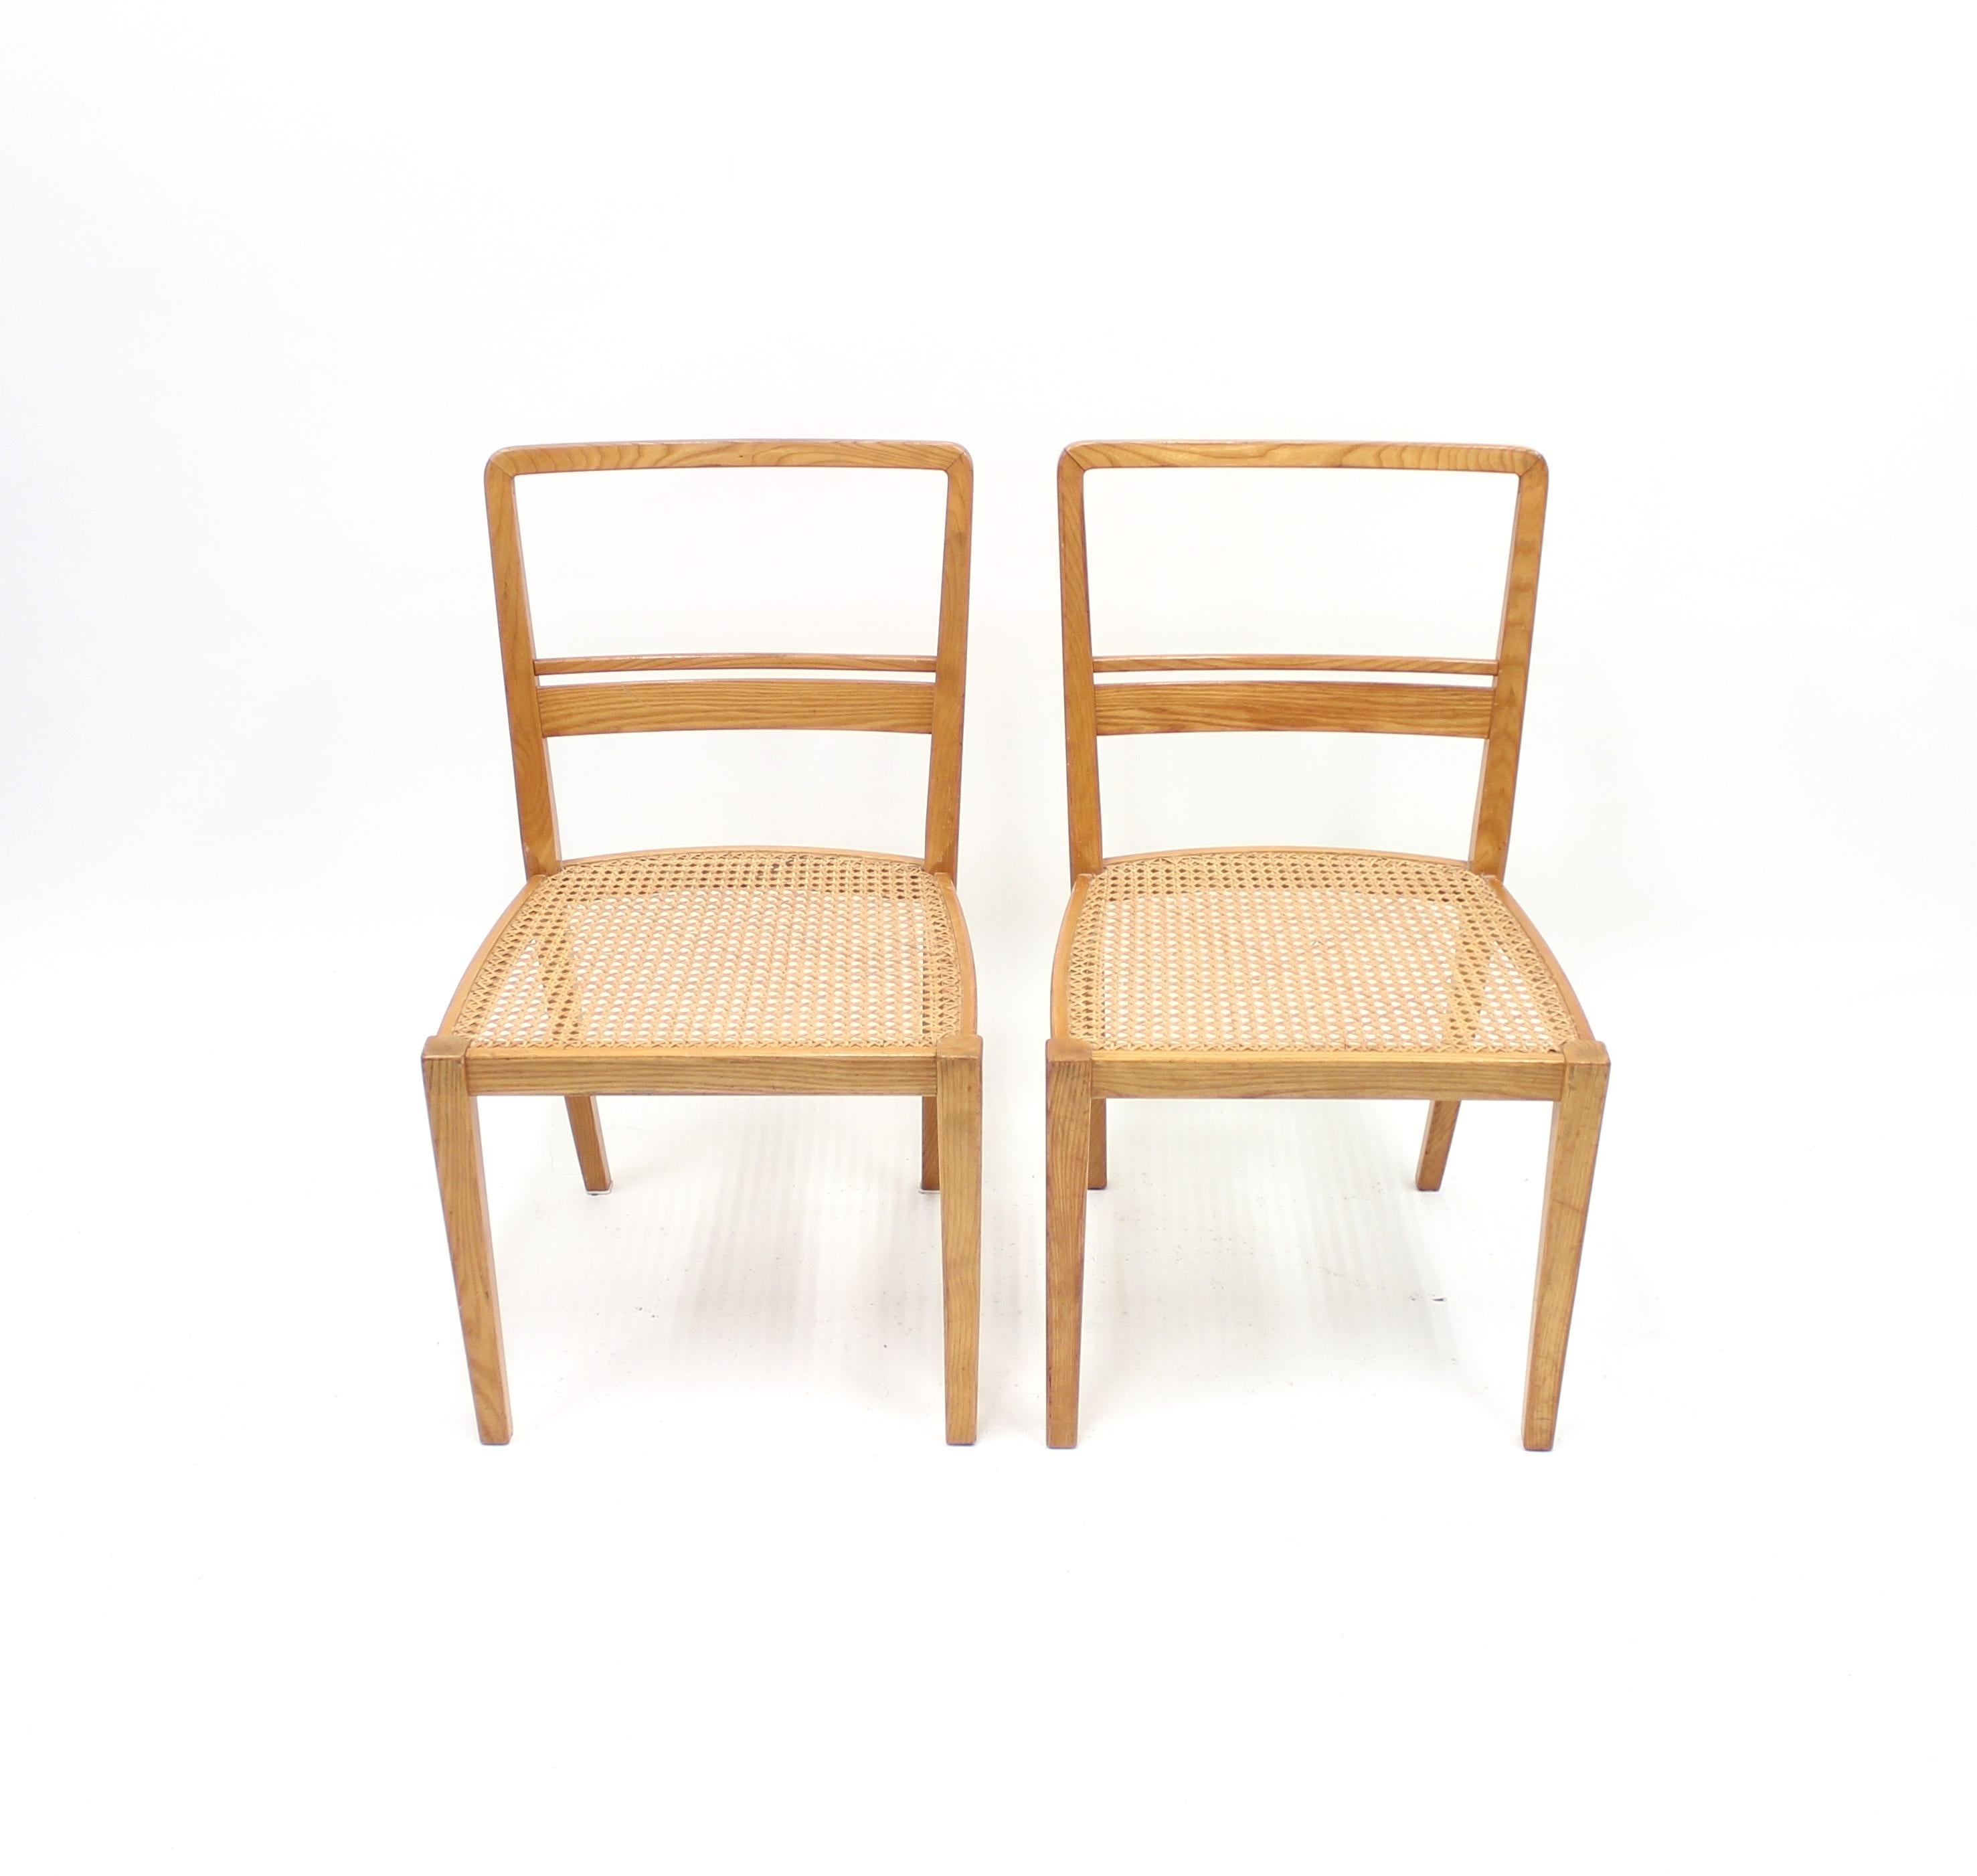 Very rare pair of chairs designed by Erik Chambert in 1937 and produced by his own company AB Chamberts Möbelfabrik. Frame made of ash with cane seat. This exact model was displayed in the International World Exhibition in Paris in 1937 and were